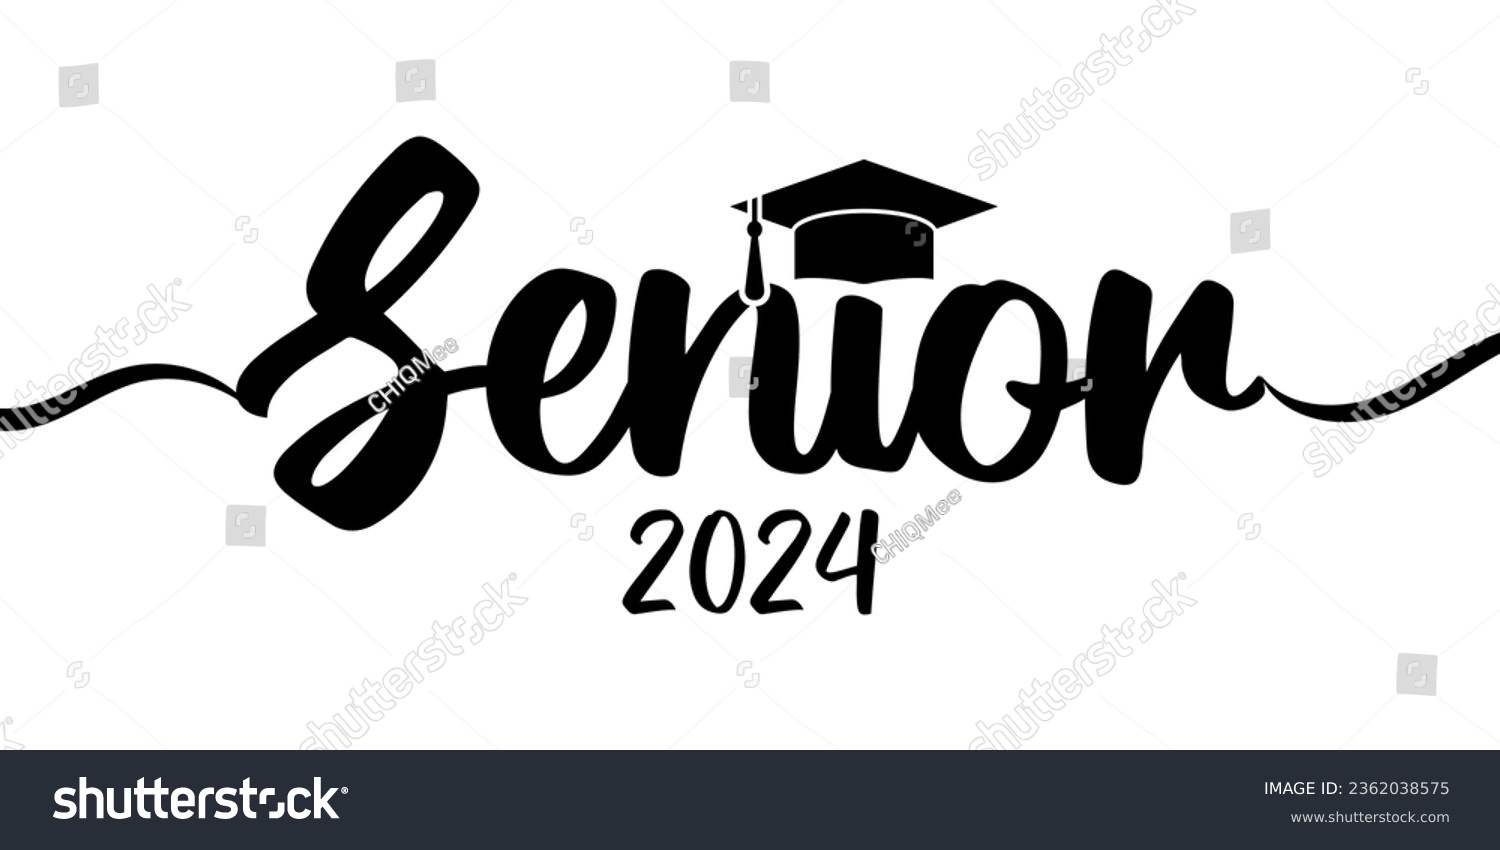 Senior 2024 typography. Black text isolated onwhite background. Vector illustration of a graduating class of 2024. graphics elements for t-shirts, and the idea for the sign #2362038575